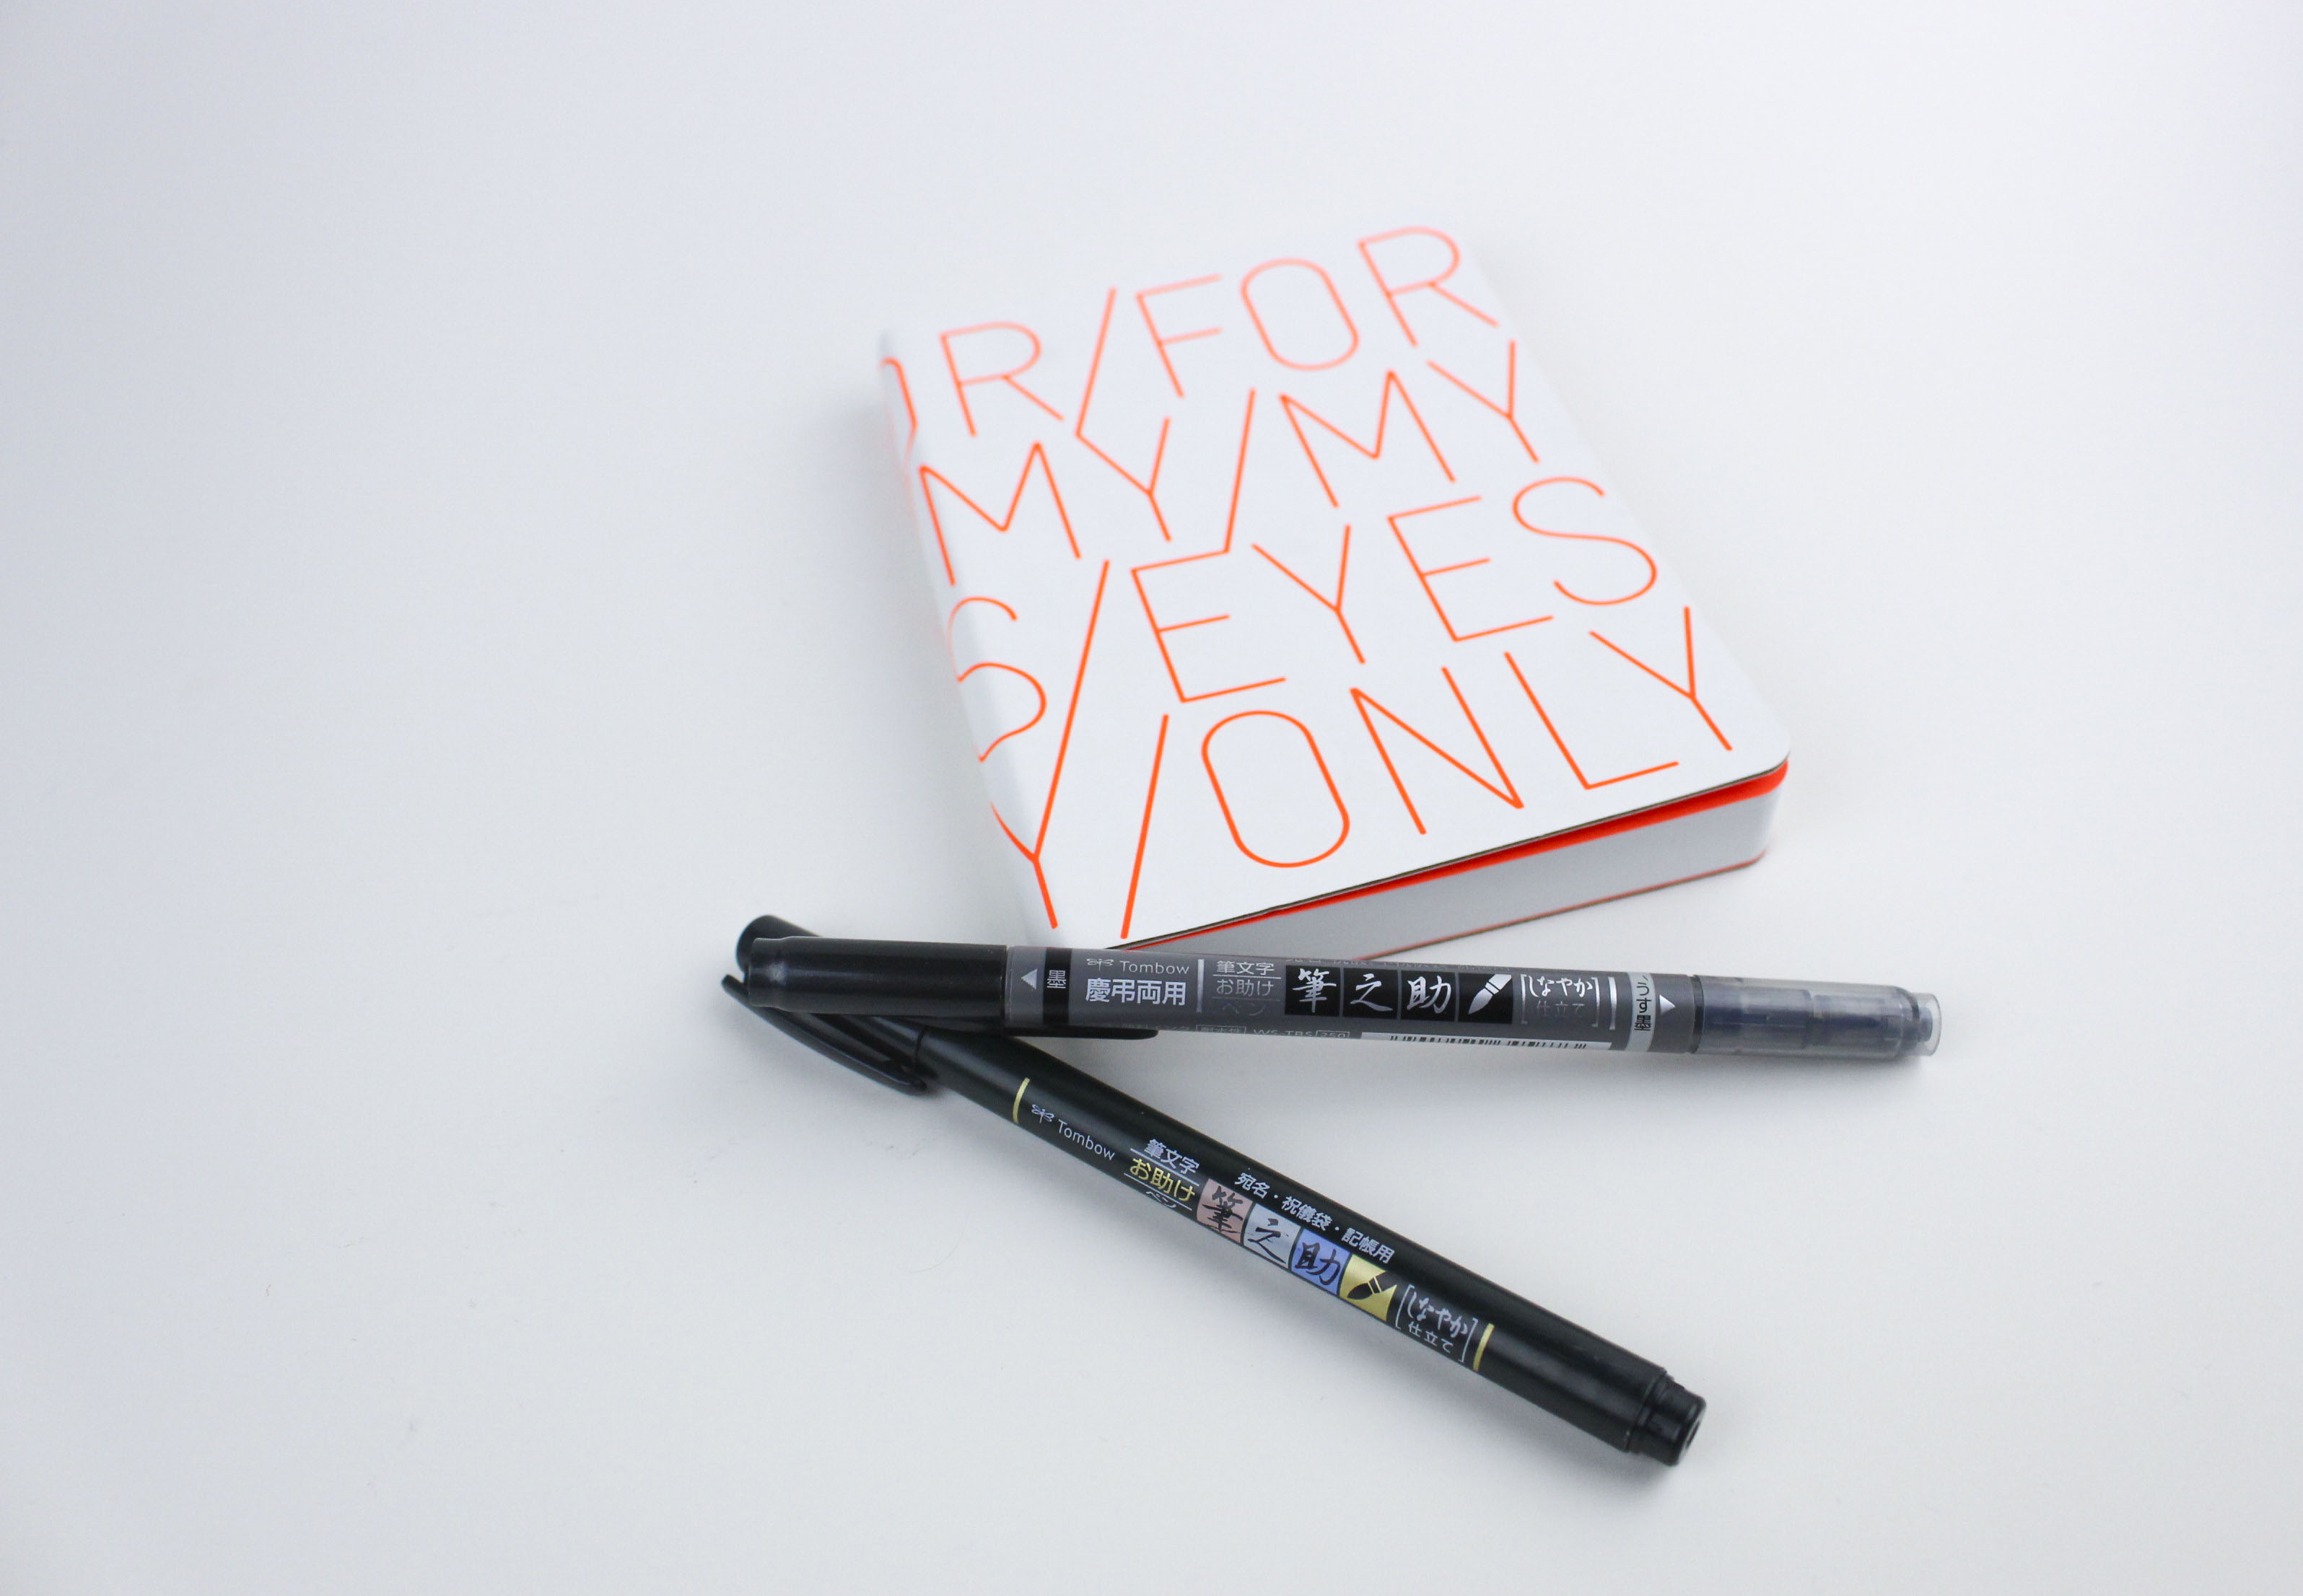 Tombow Brush Pen Testing in 8 Different Bullet Journals – All About Planners